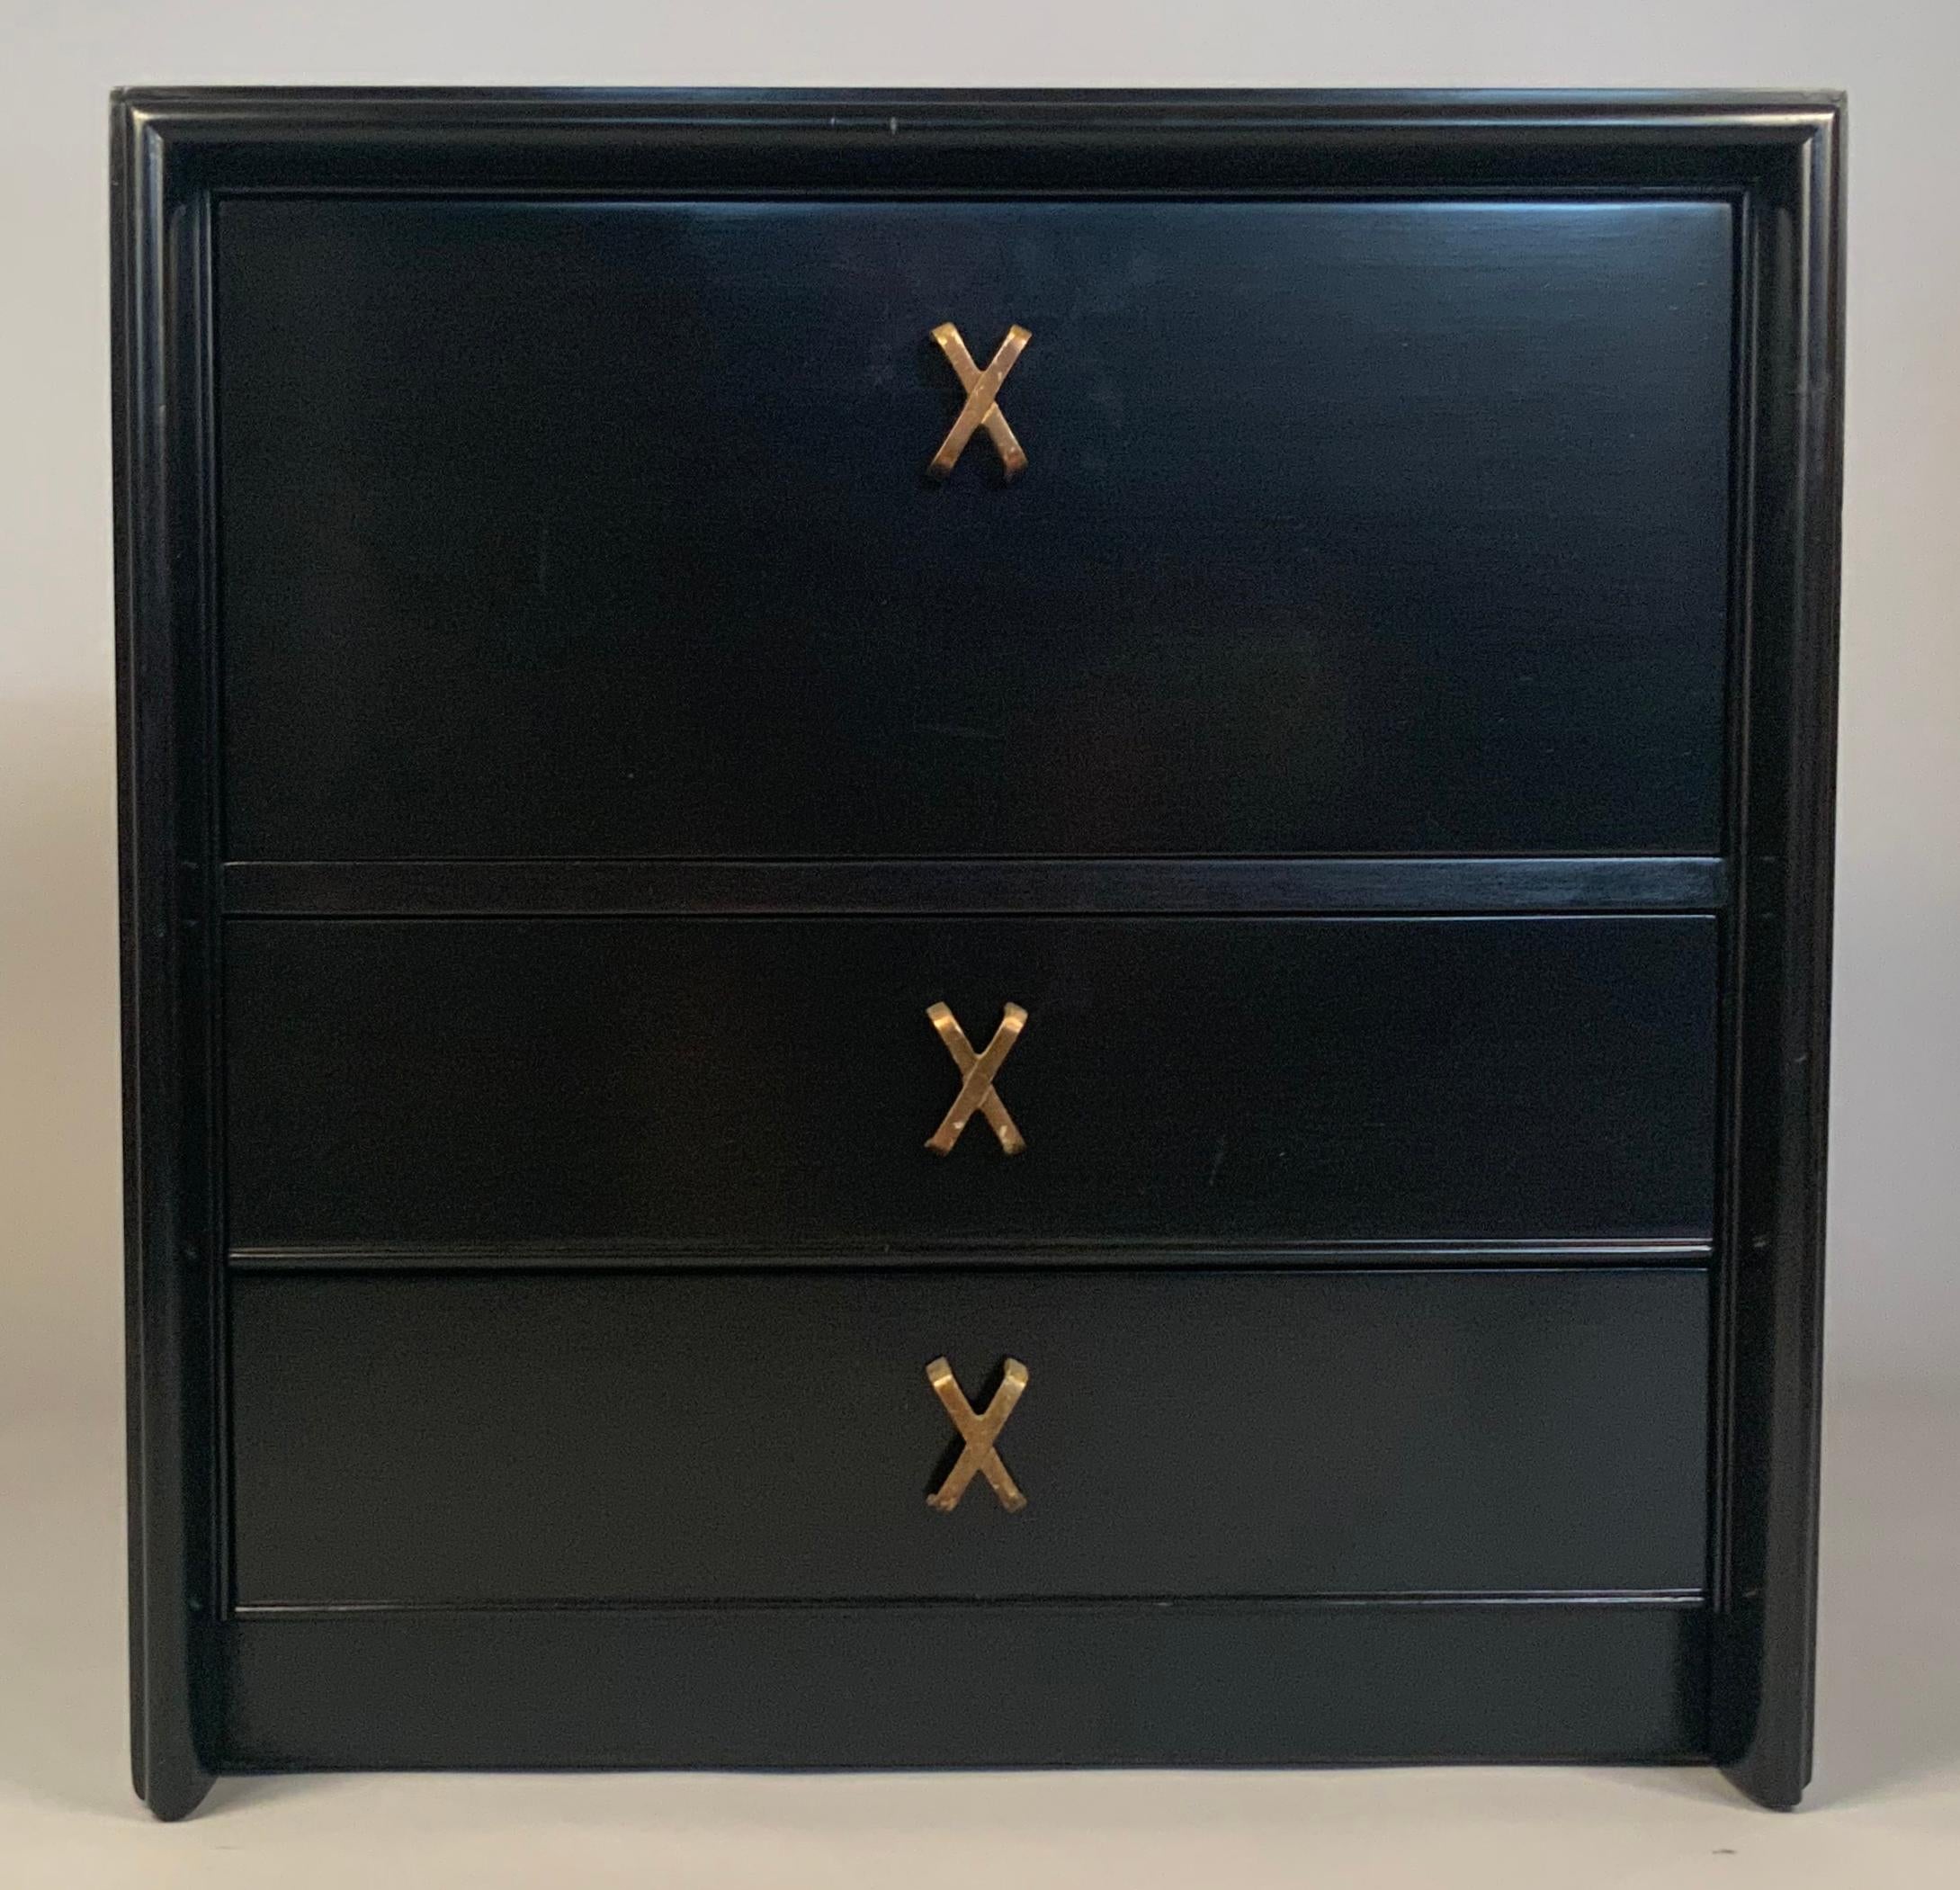 A very handsome classic pair of 1940's nightstands, with ebonized mahogany cases. Each has a pair of drawers underneath a large open storage space with a hinged drop-down door. the stands have their original brass X drawer hardware.